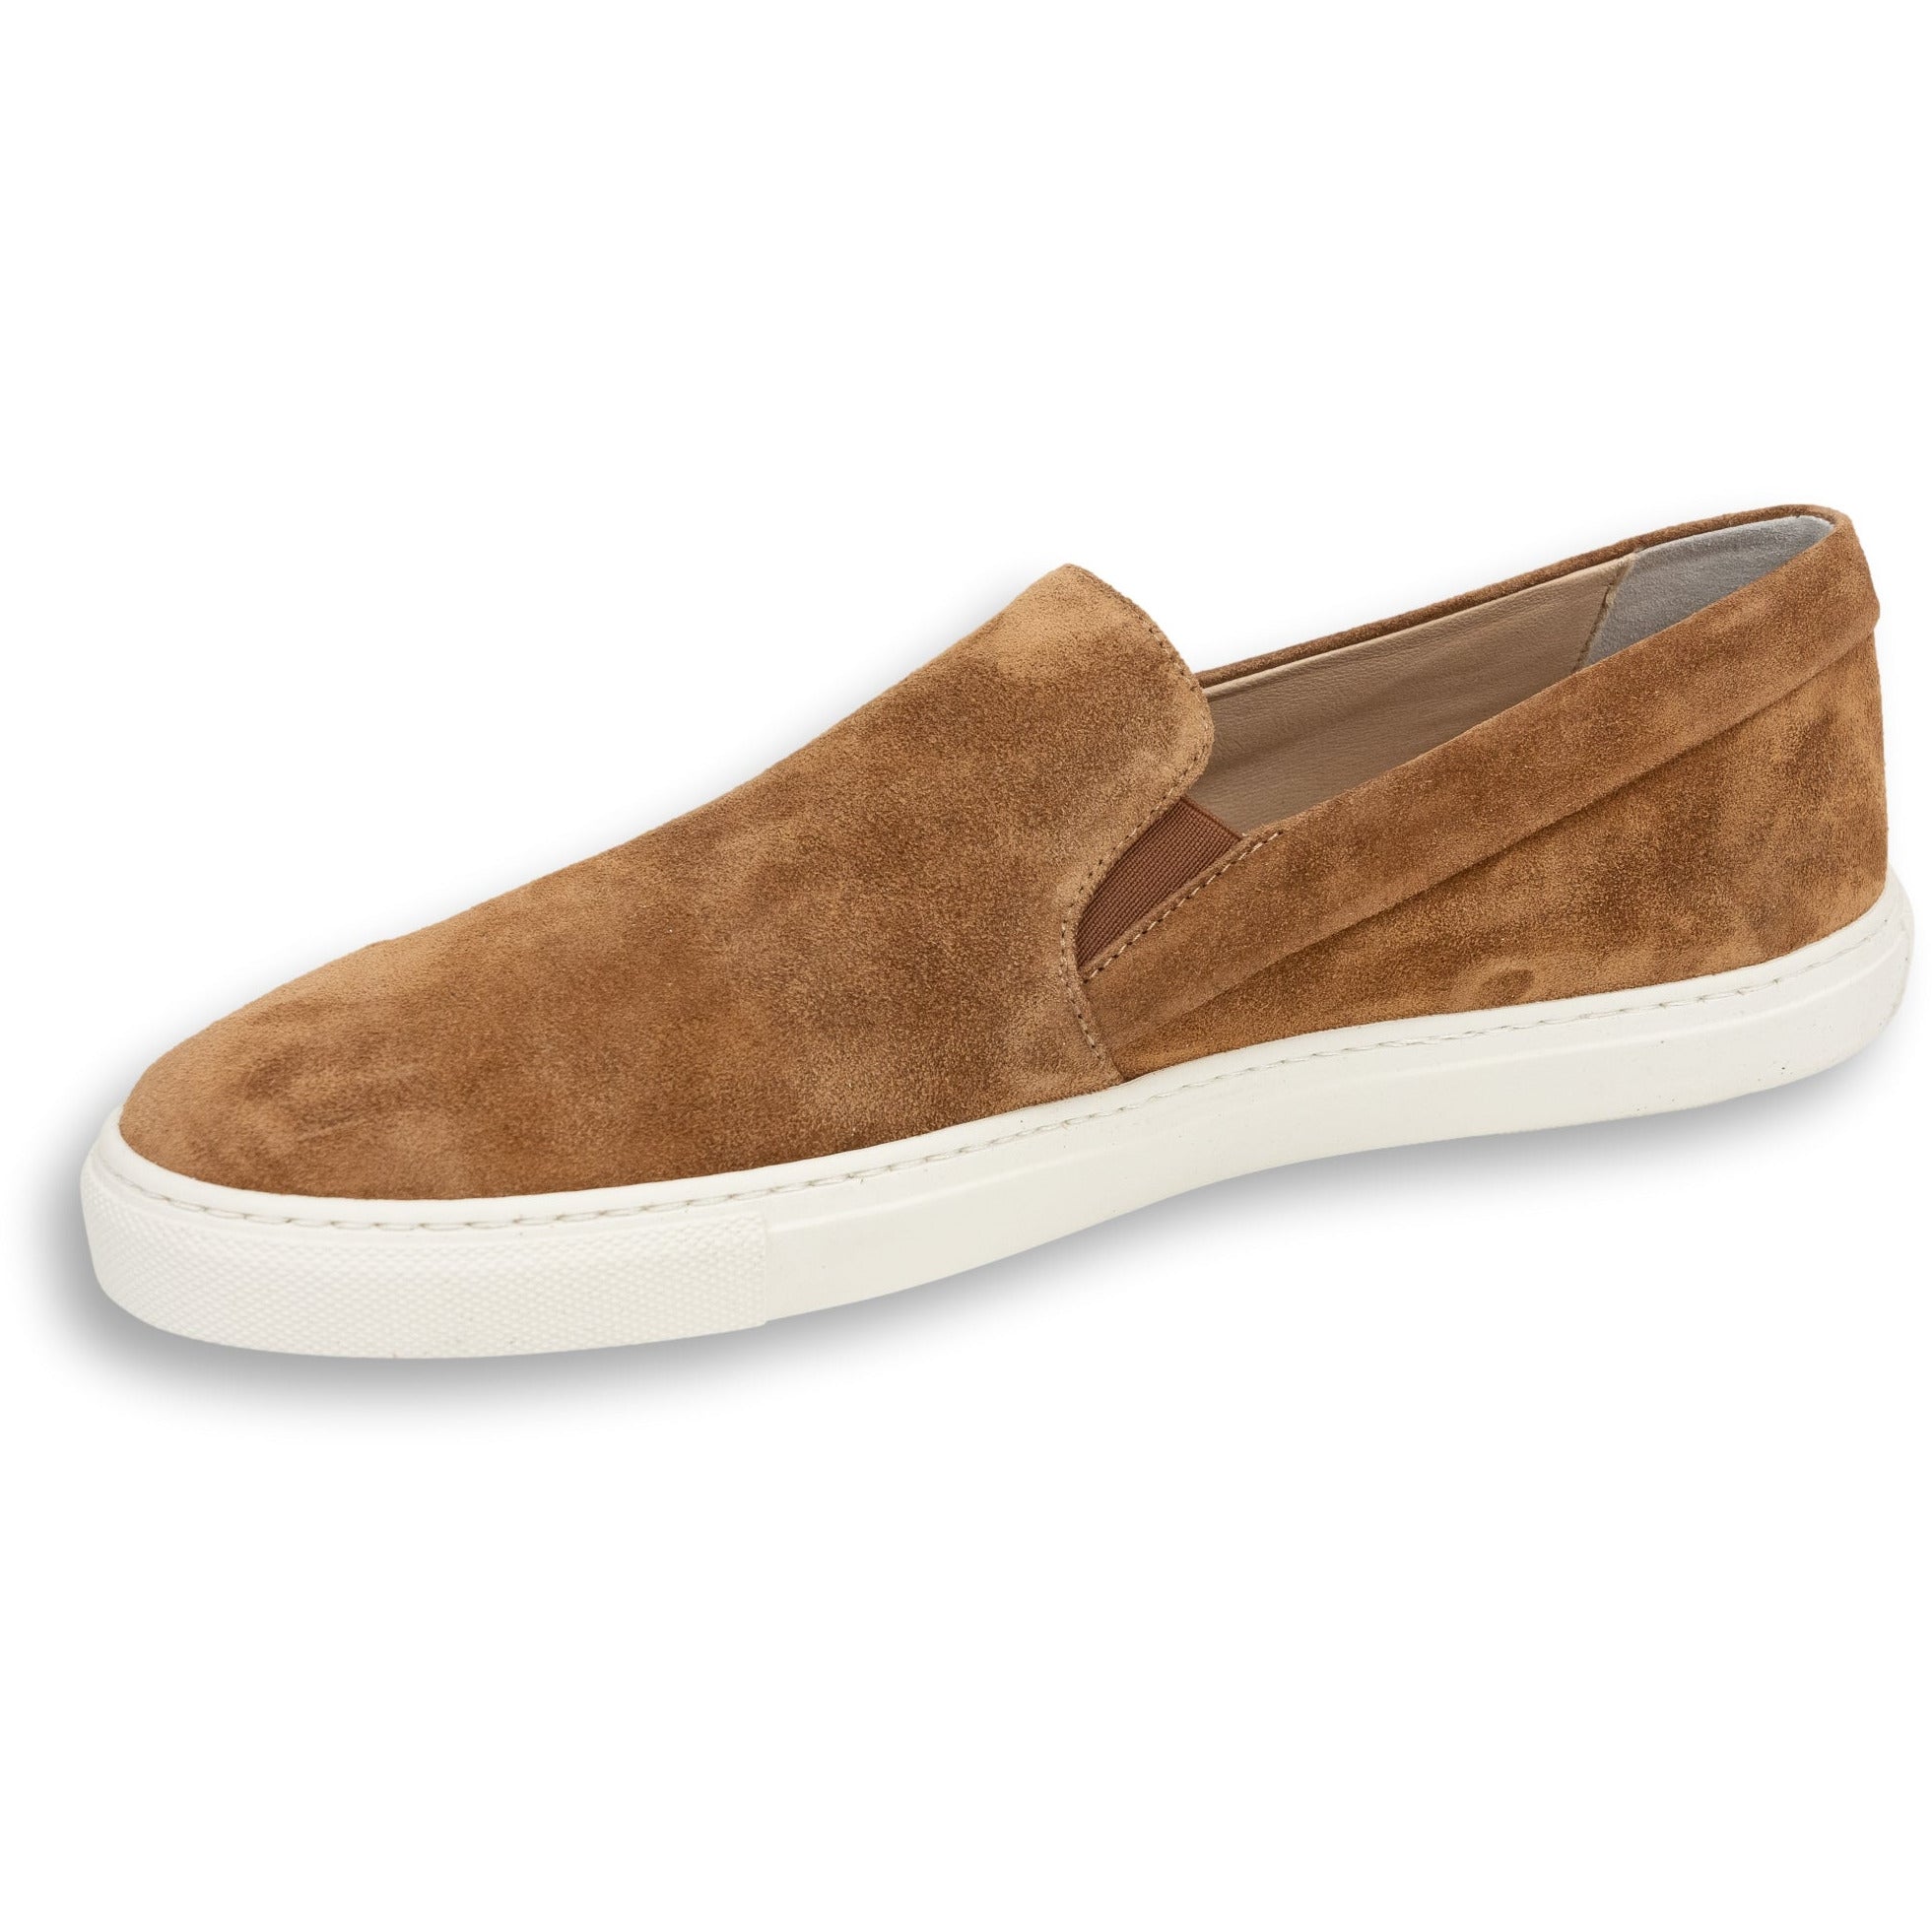 Italian Suede Slip-on Shoes